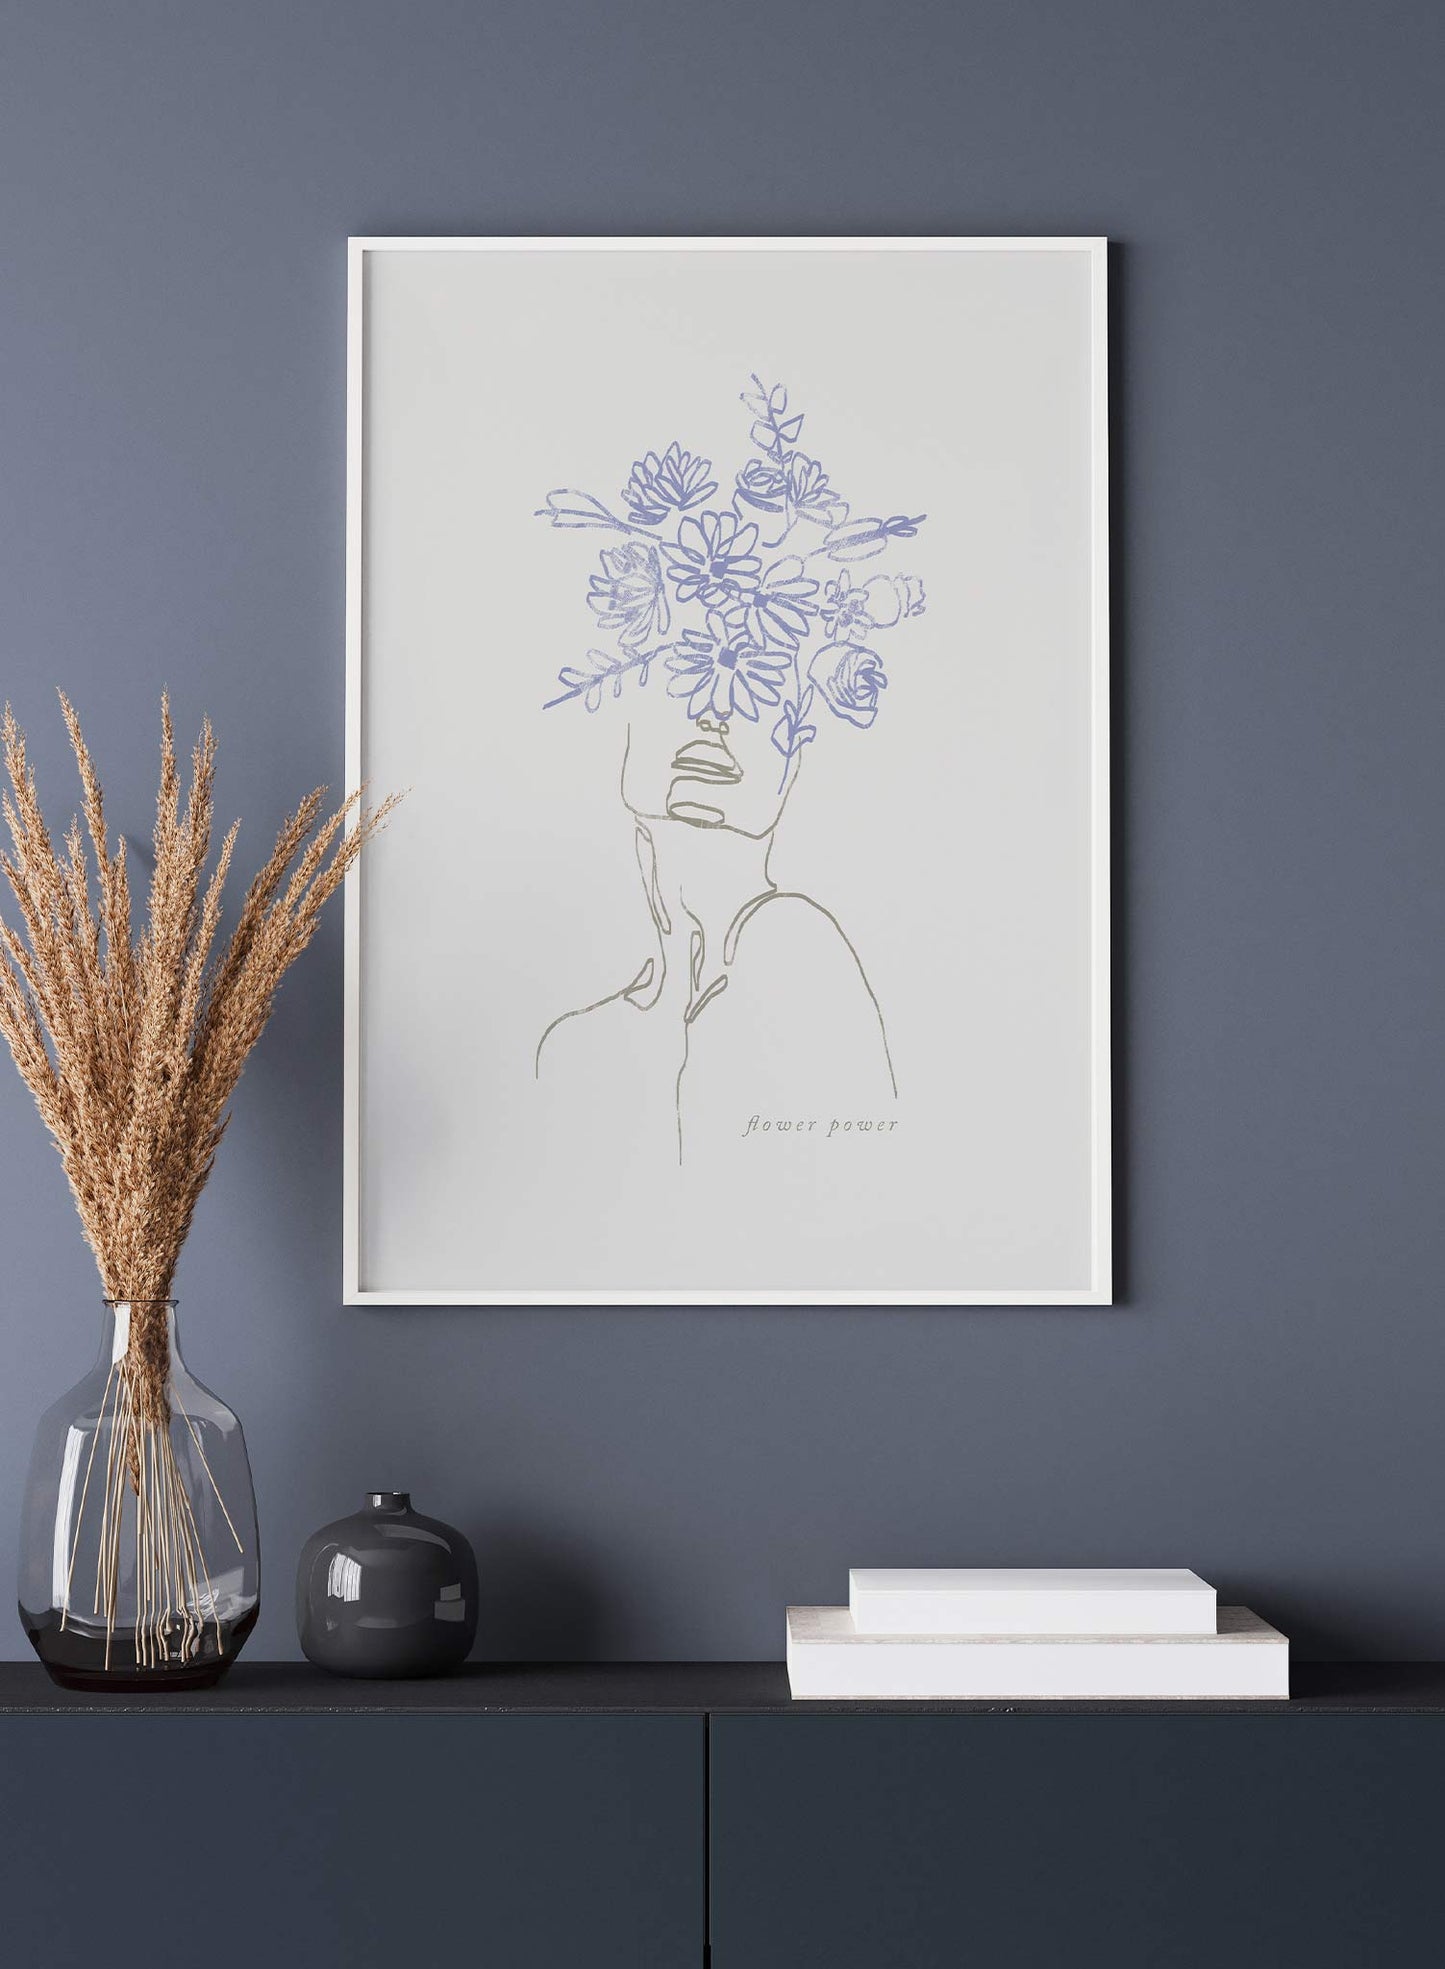 Flourishing is a line art illustration of a person wearing a blue flower crown covering half the face by Opposite Wall.